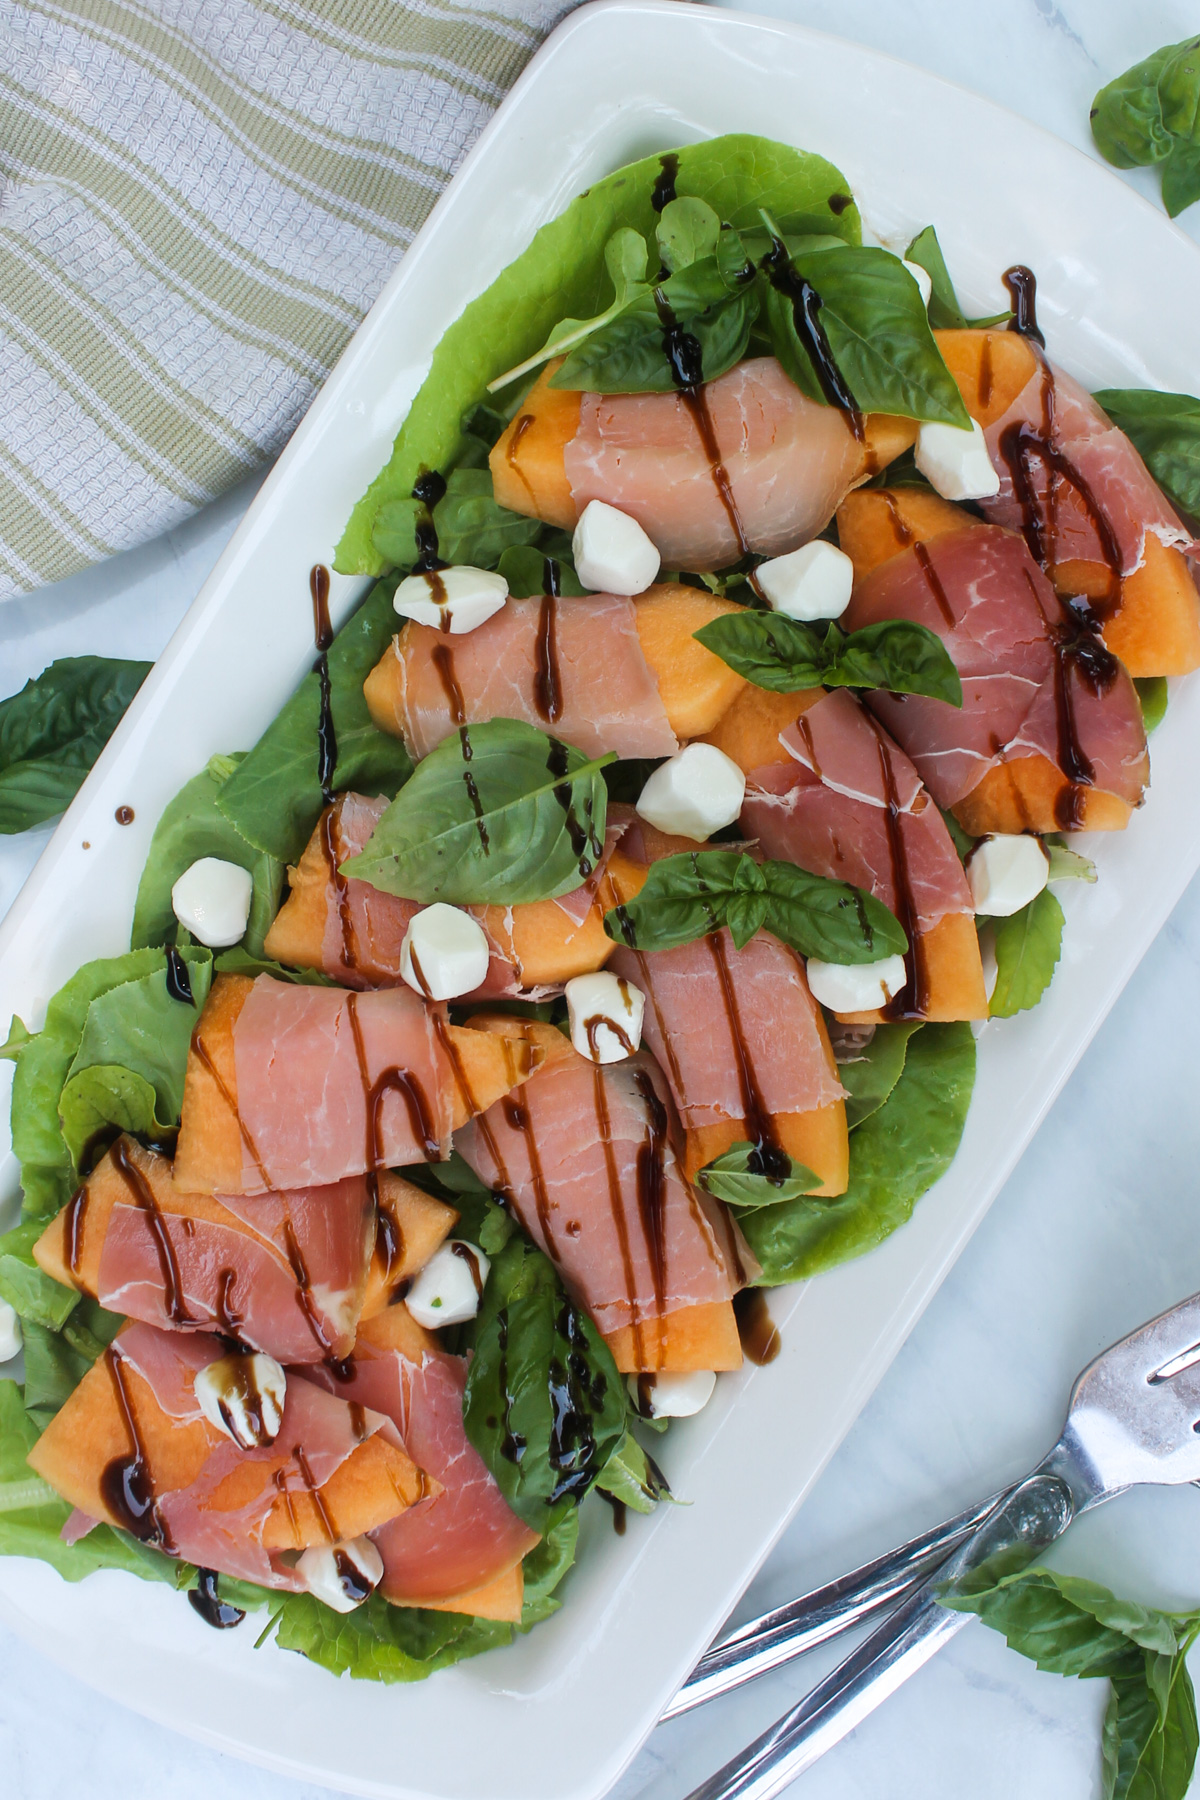 Assembled melon prosciutto salad on a bed of arugula greens with balsamic glaze.